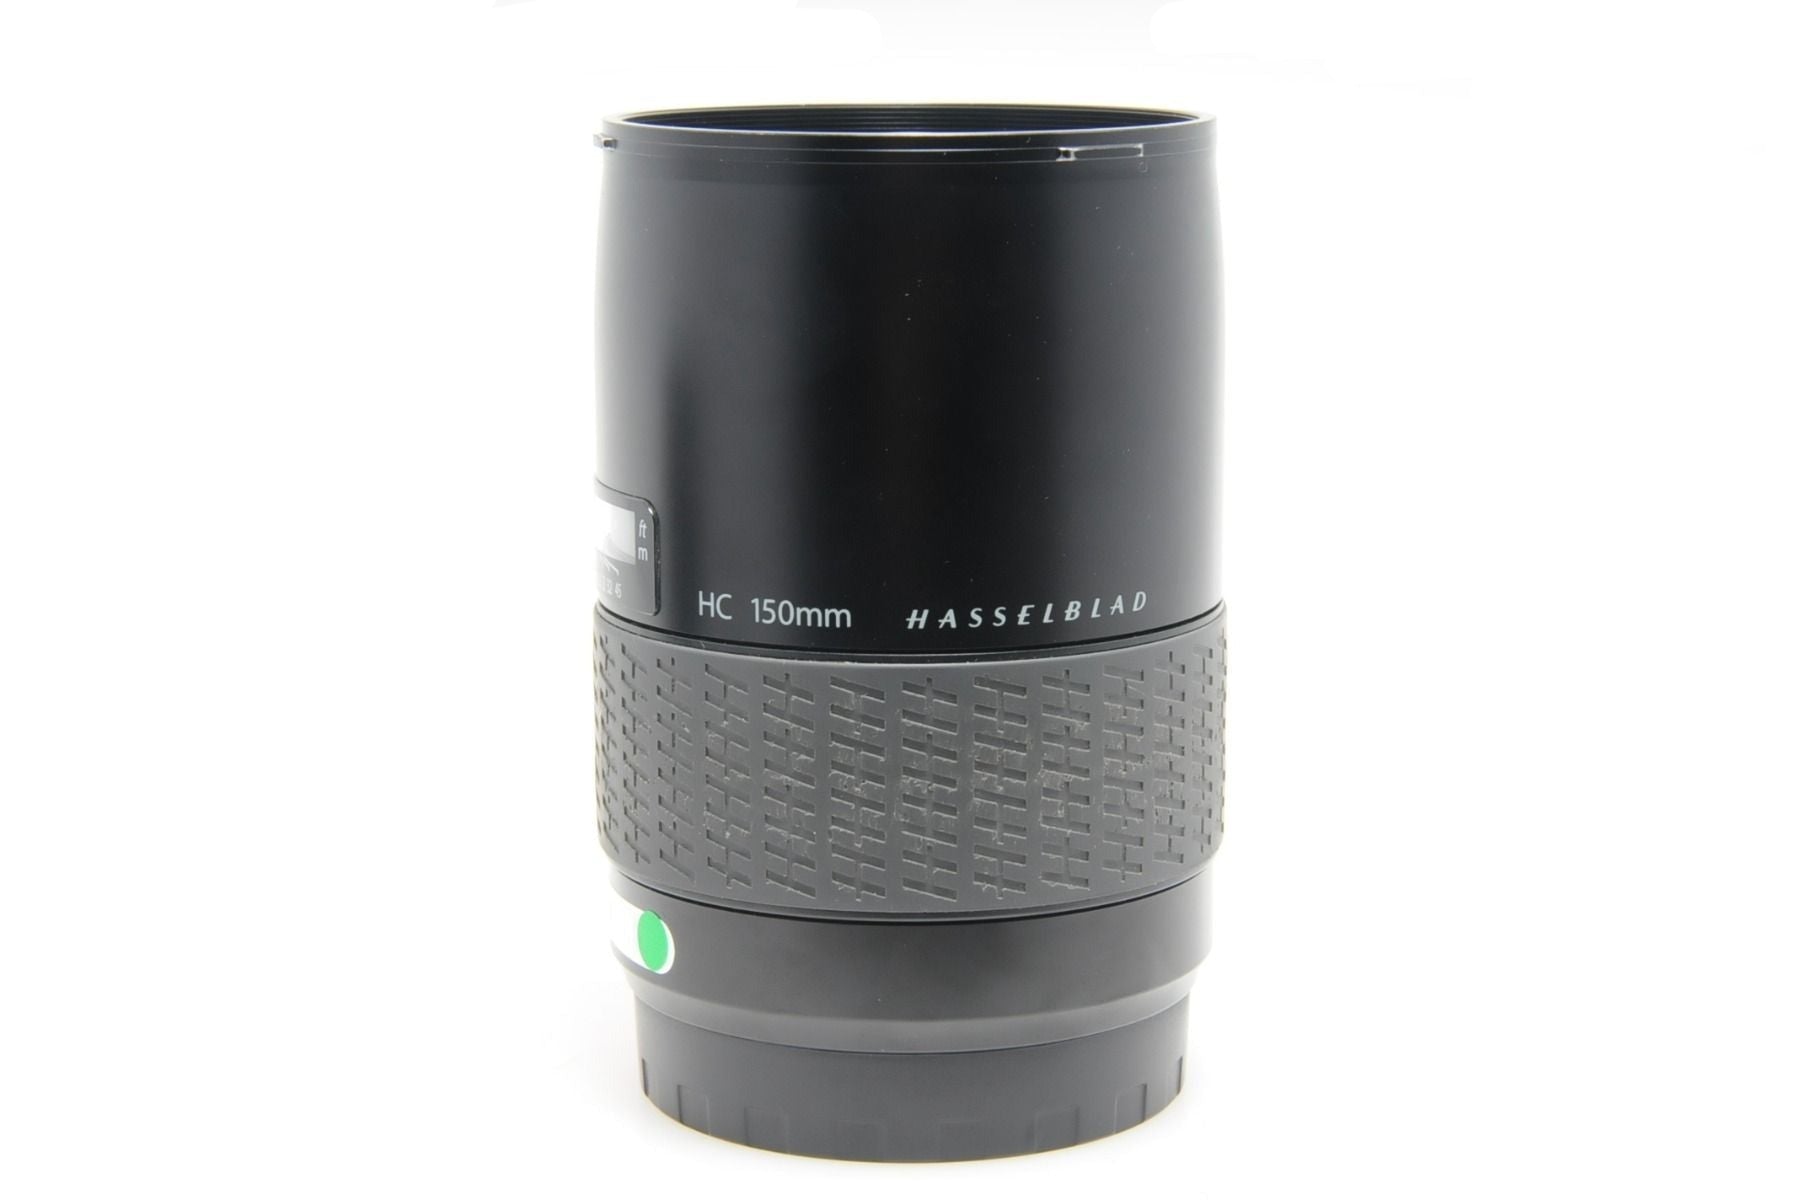 Used Hasselblad HC 150mm F3.2 Digital lens (Actuations 27245)(Boxed SH36537)